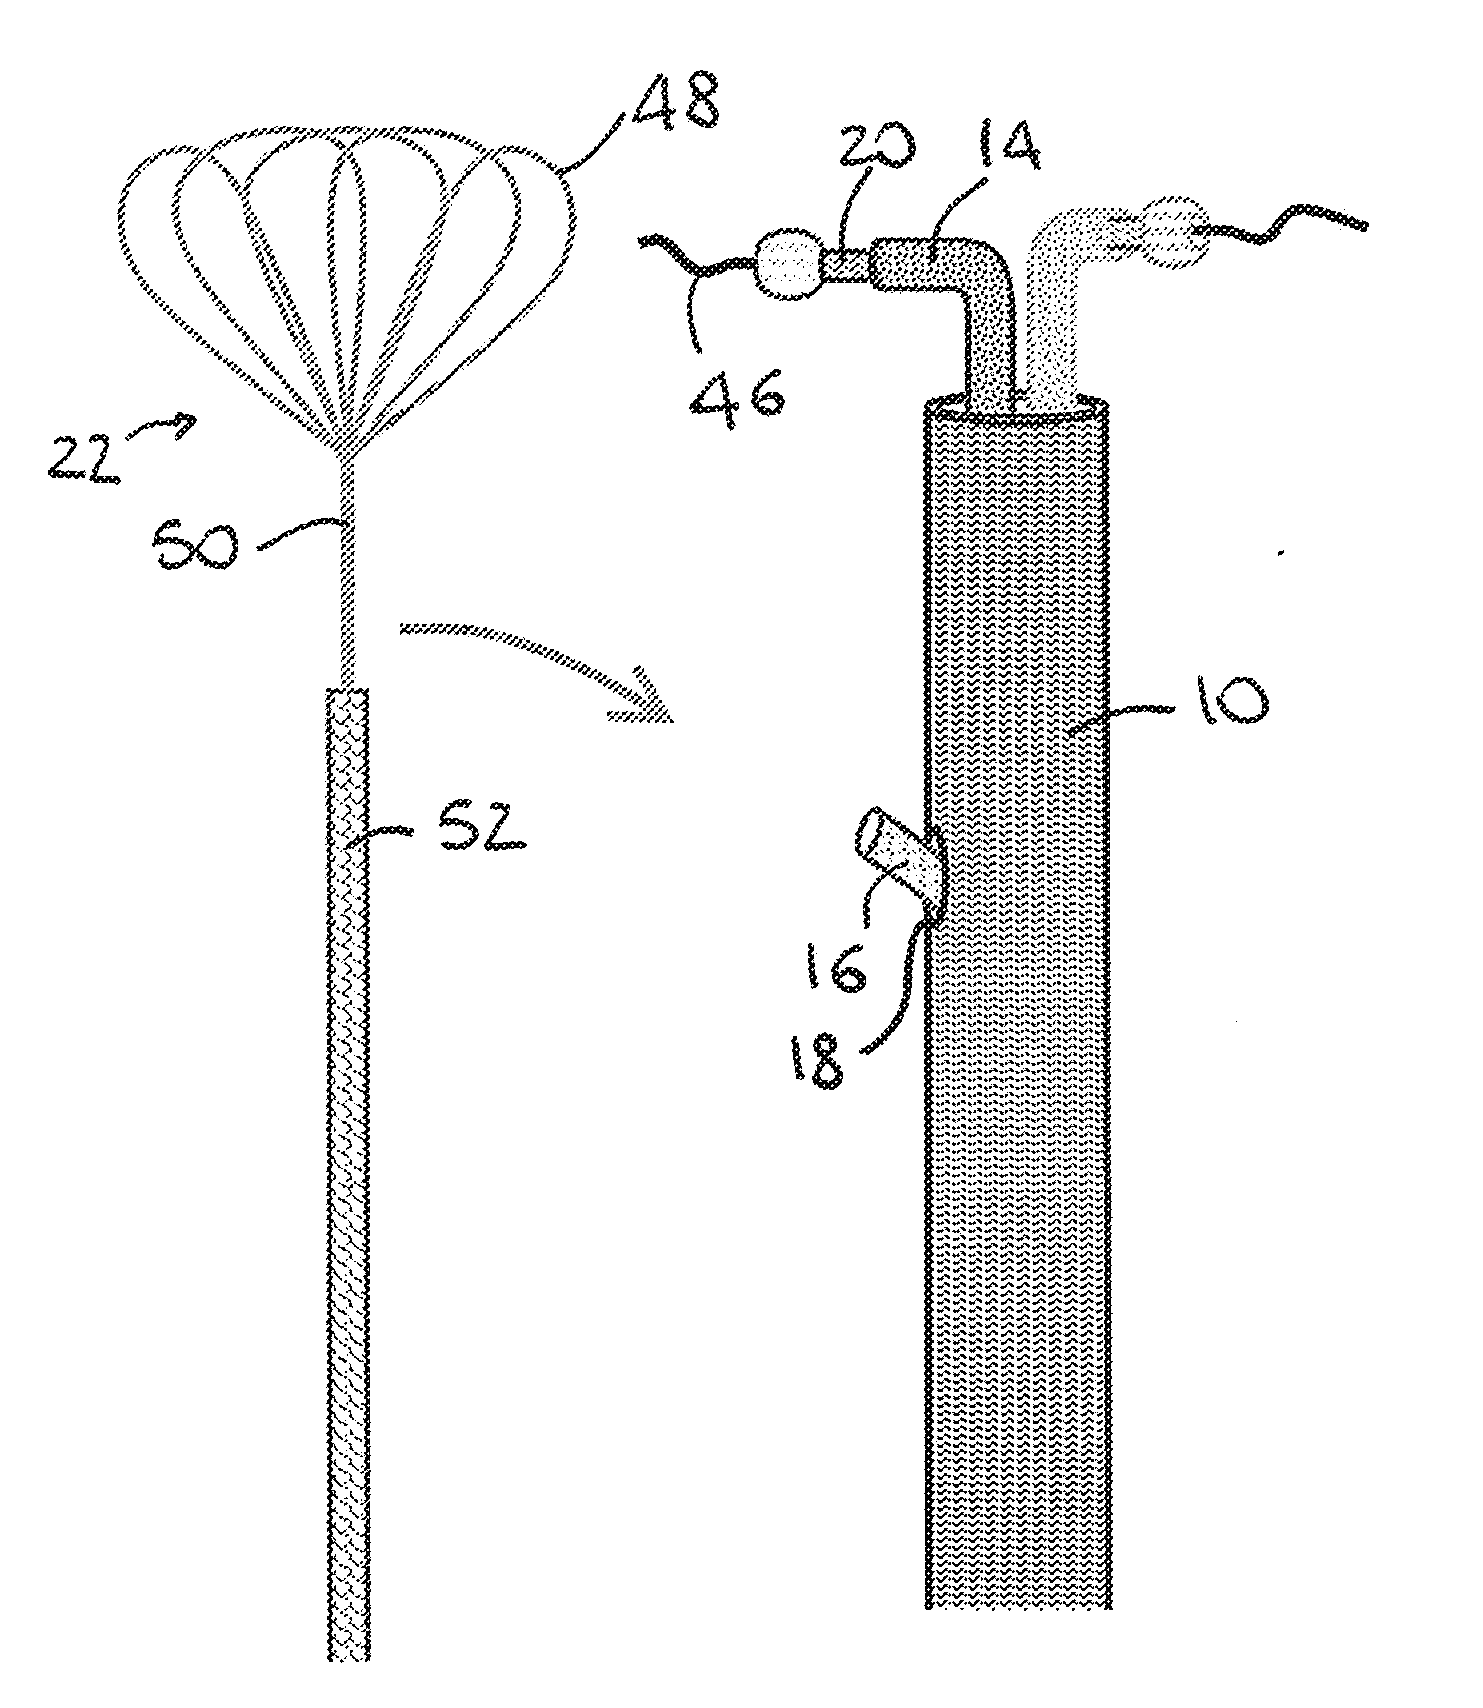 Device for the Deployment of a System of Guide Wires Within a Cardiac Chamber for Implanting a Prosthetic Heart Valve